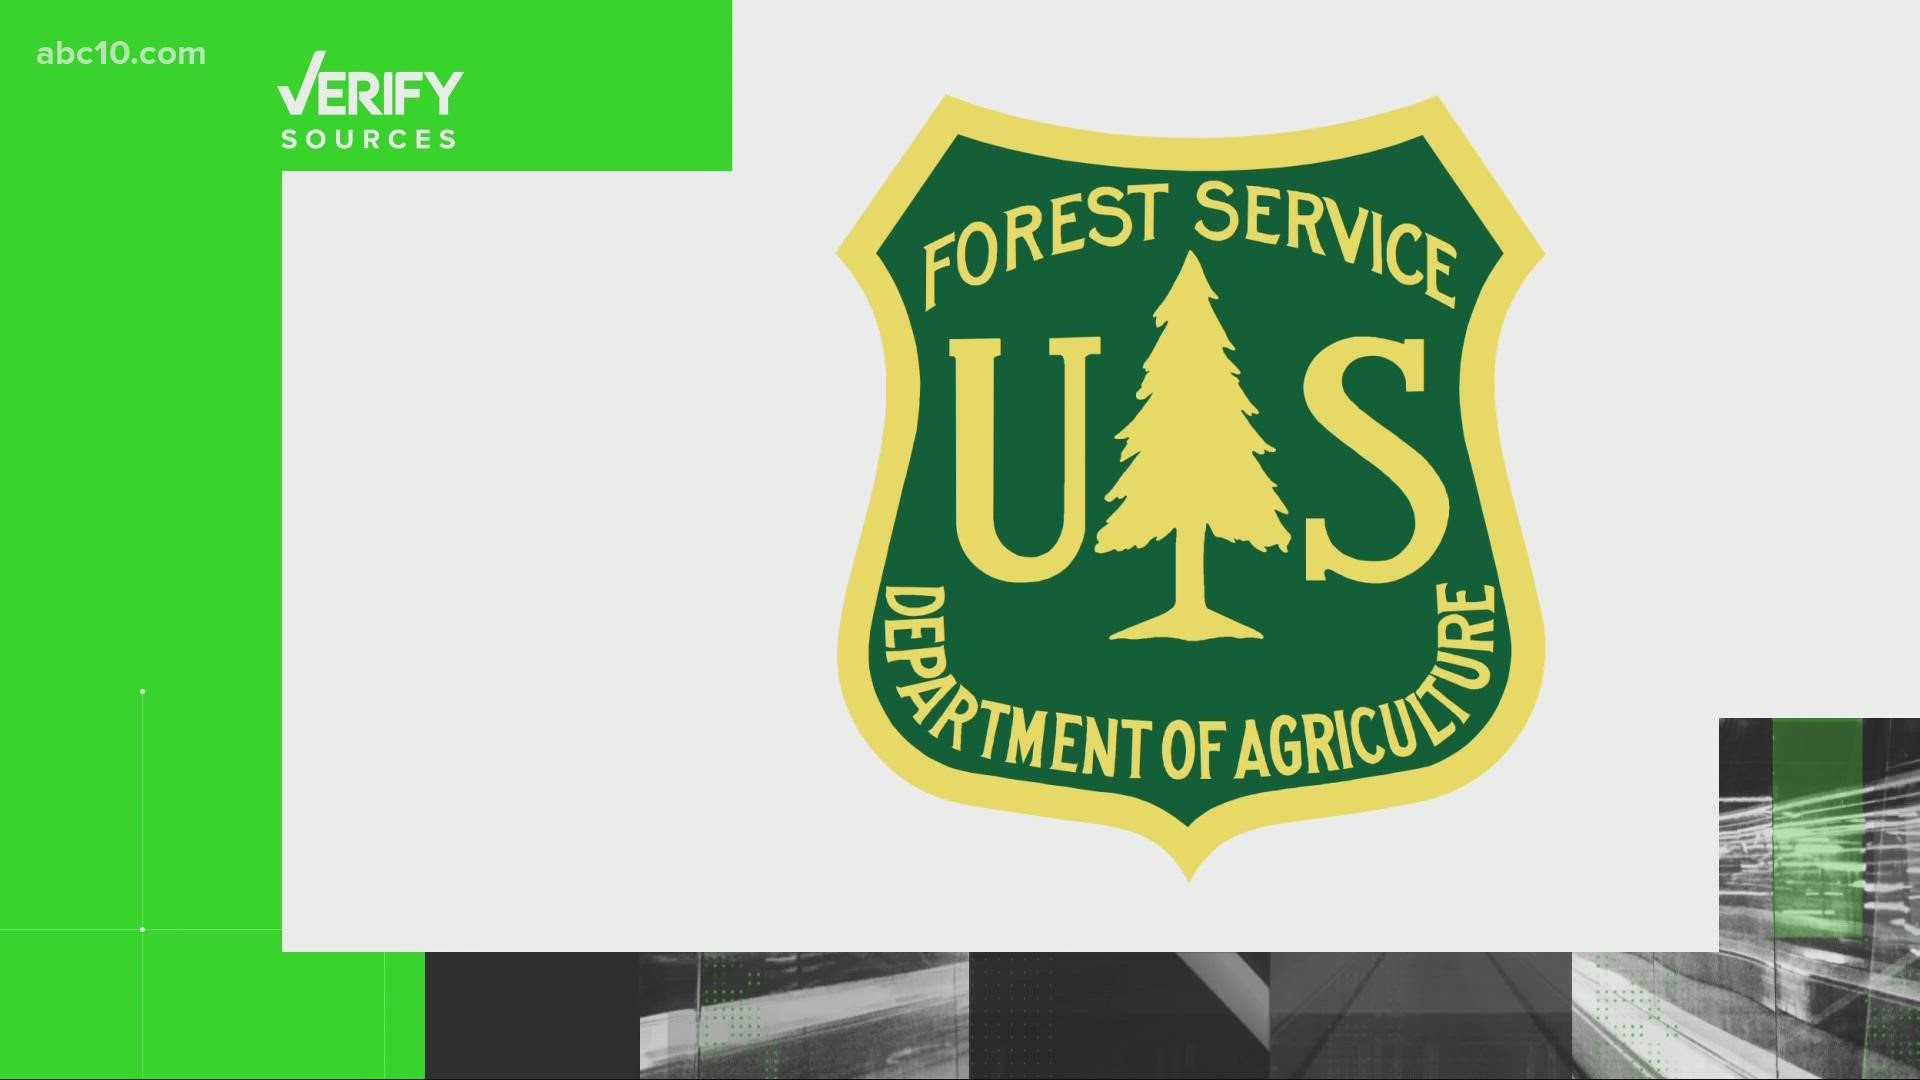 Multiple fire officials have criticized a so-called USFS "let it burn" policy, saying it's reckless. We verify if the policy even exists.